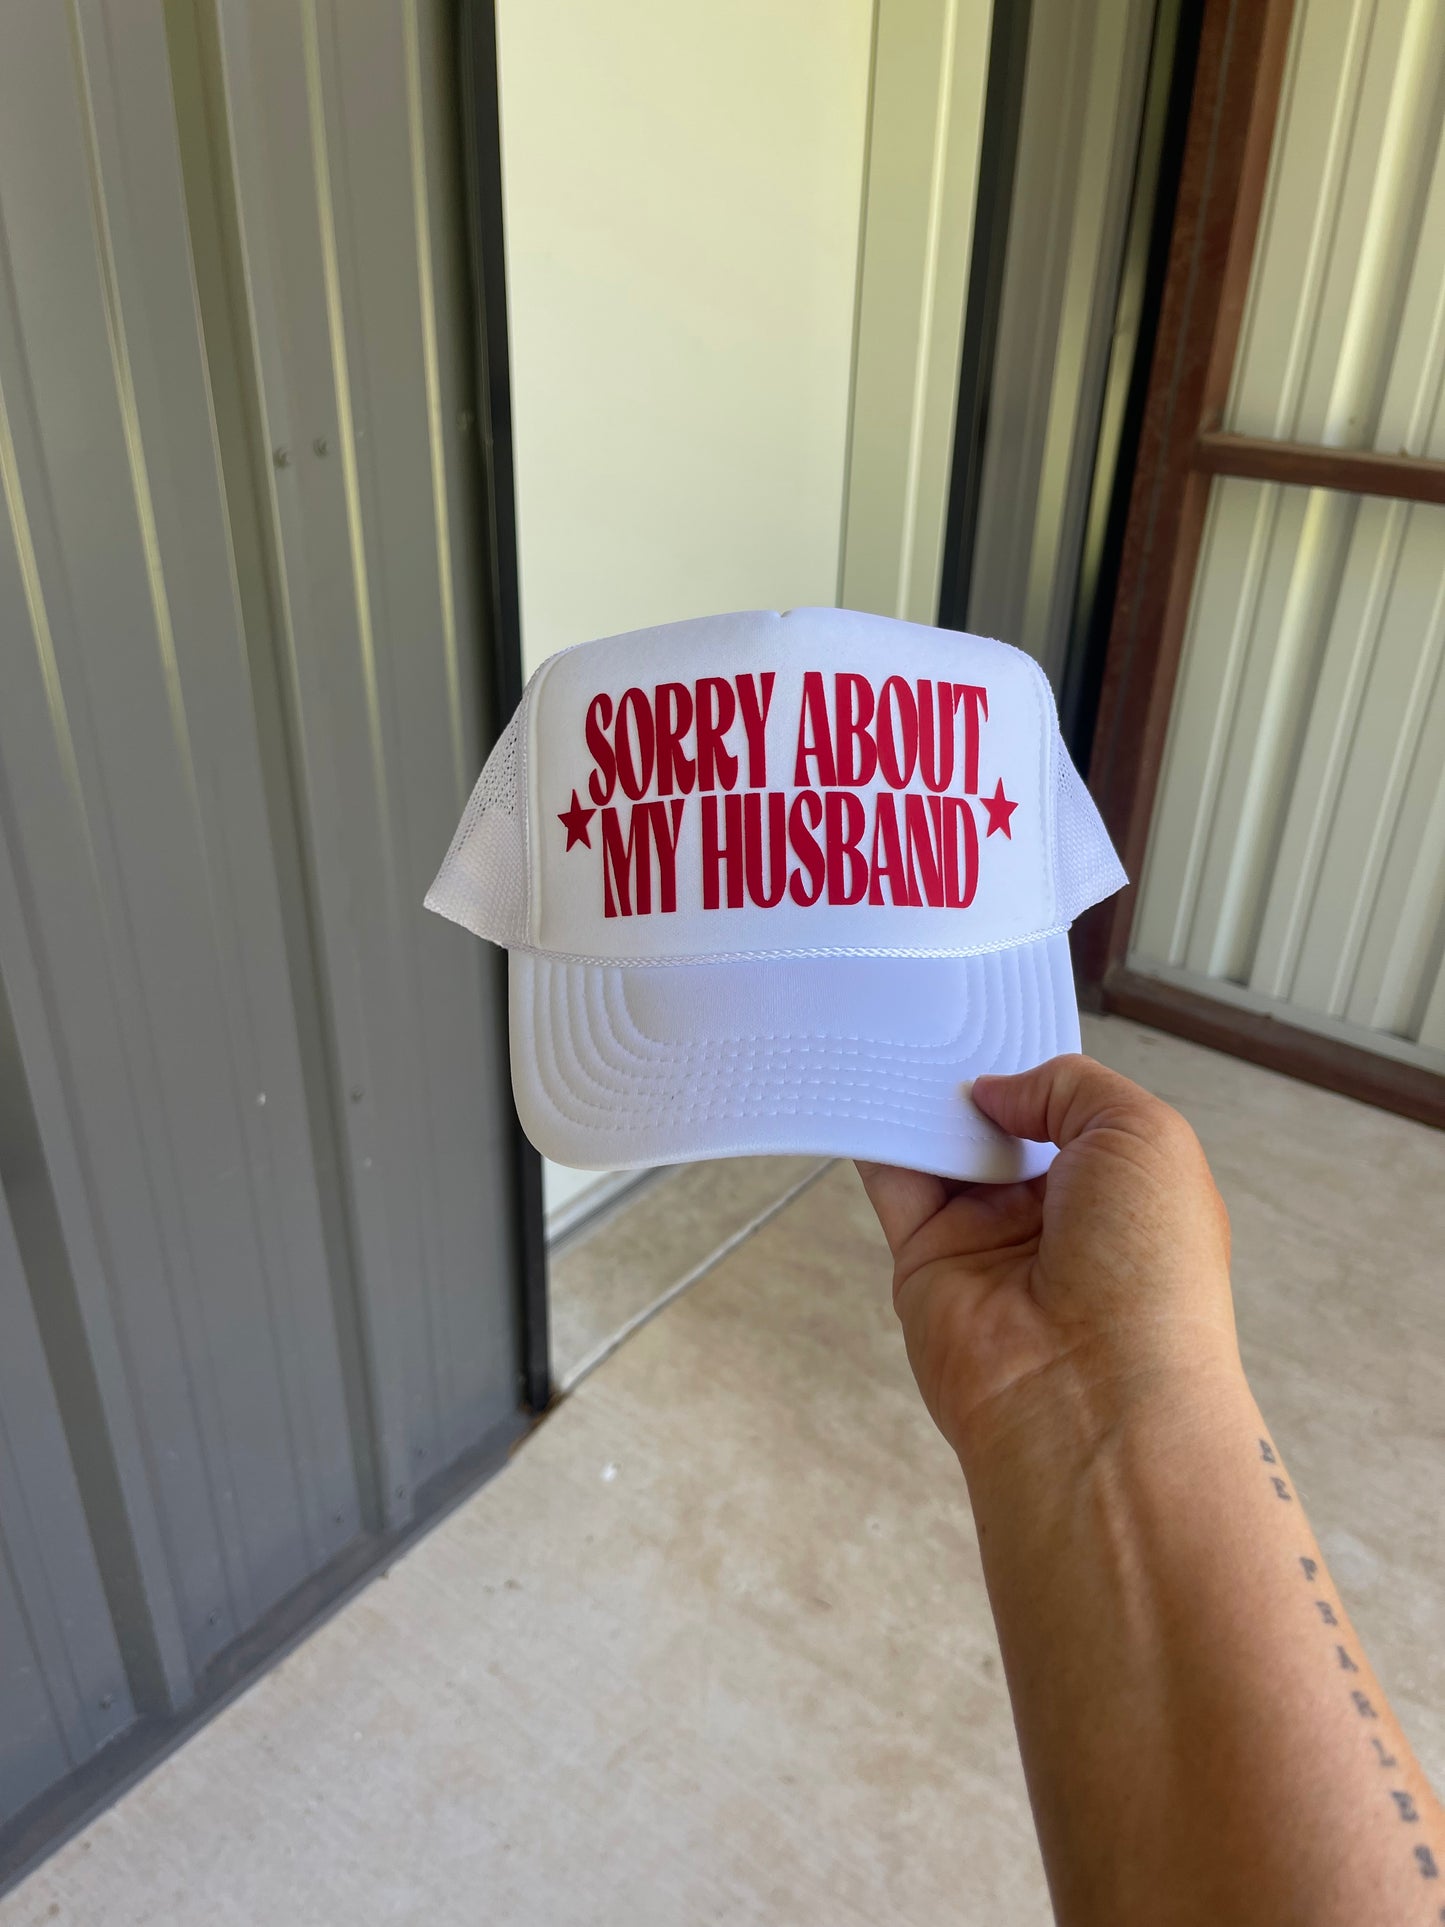 SORRY ABOUT MY HUSBAND